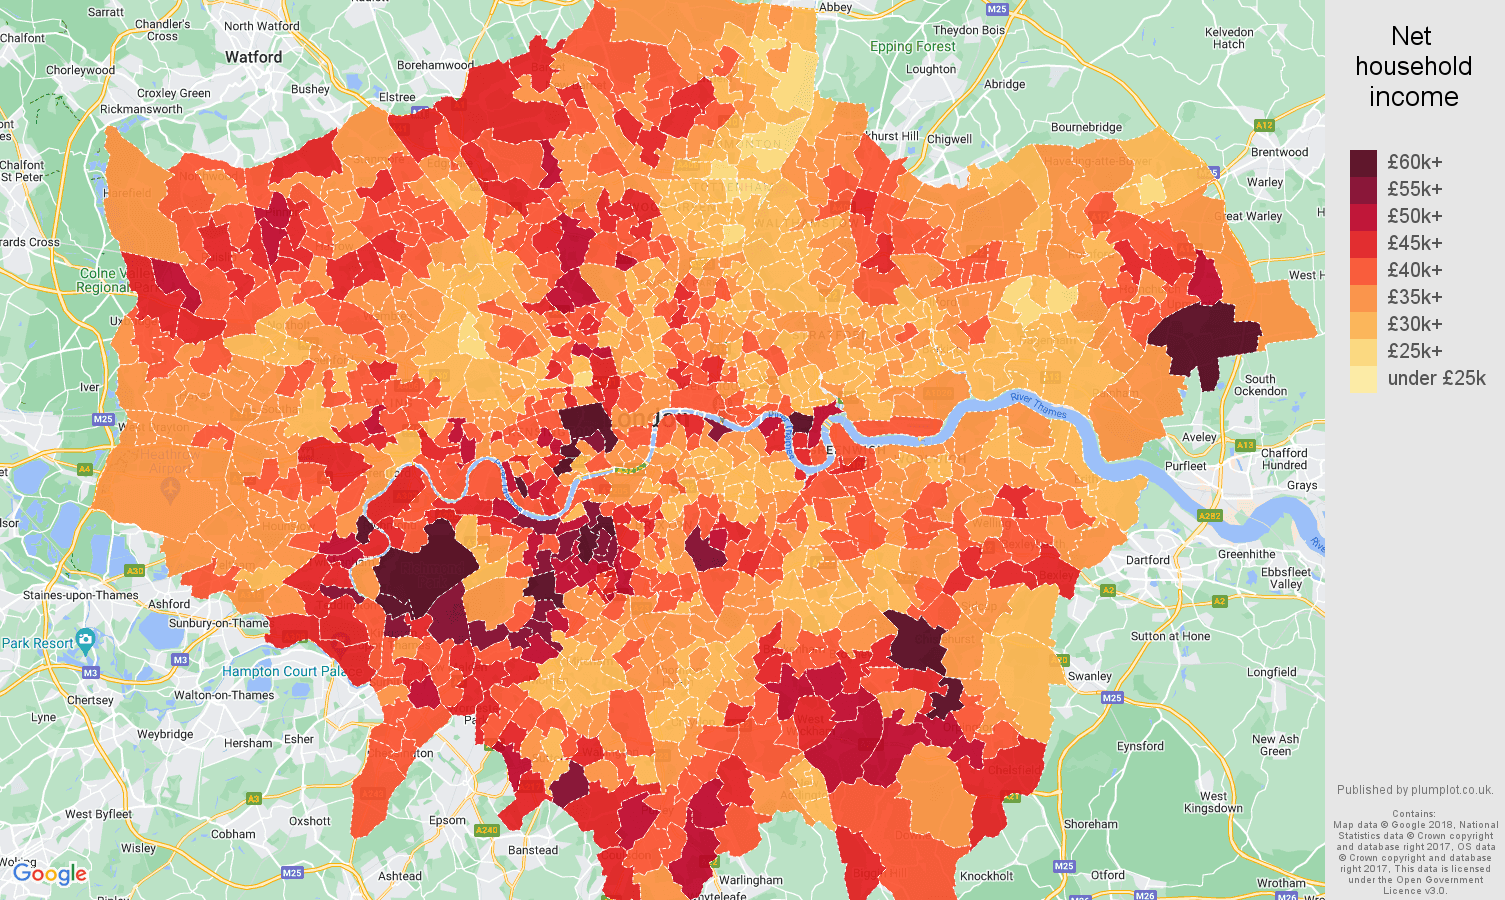 London net household income map